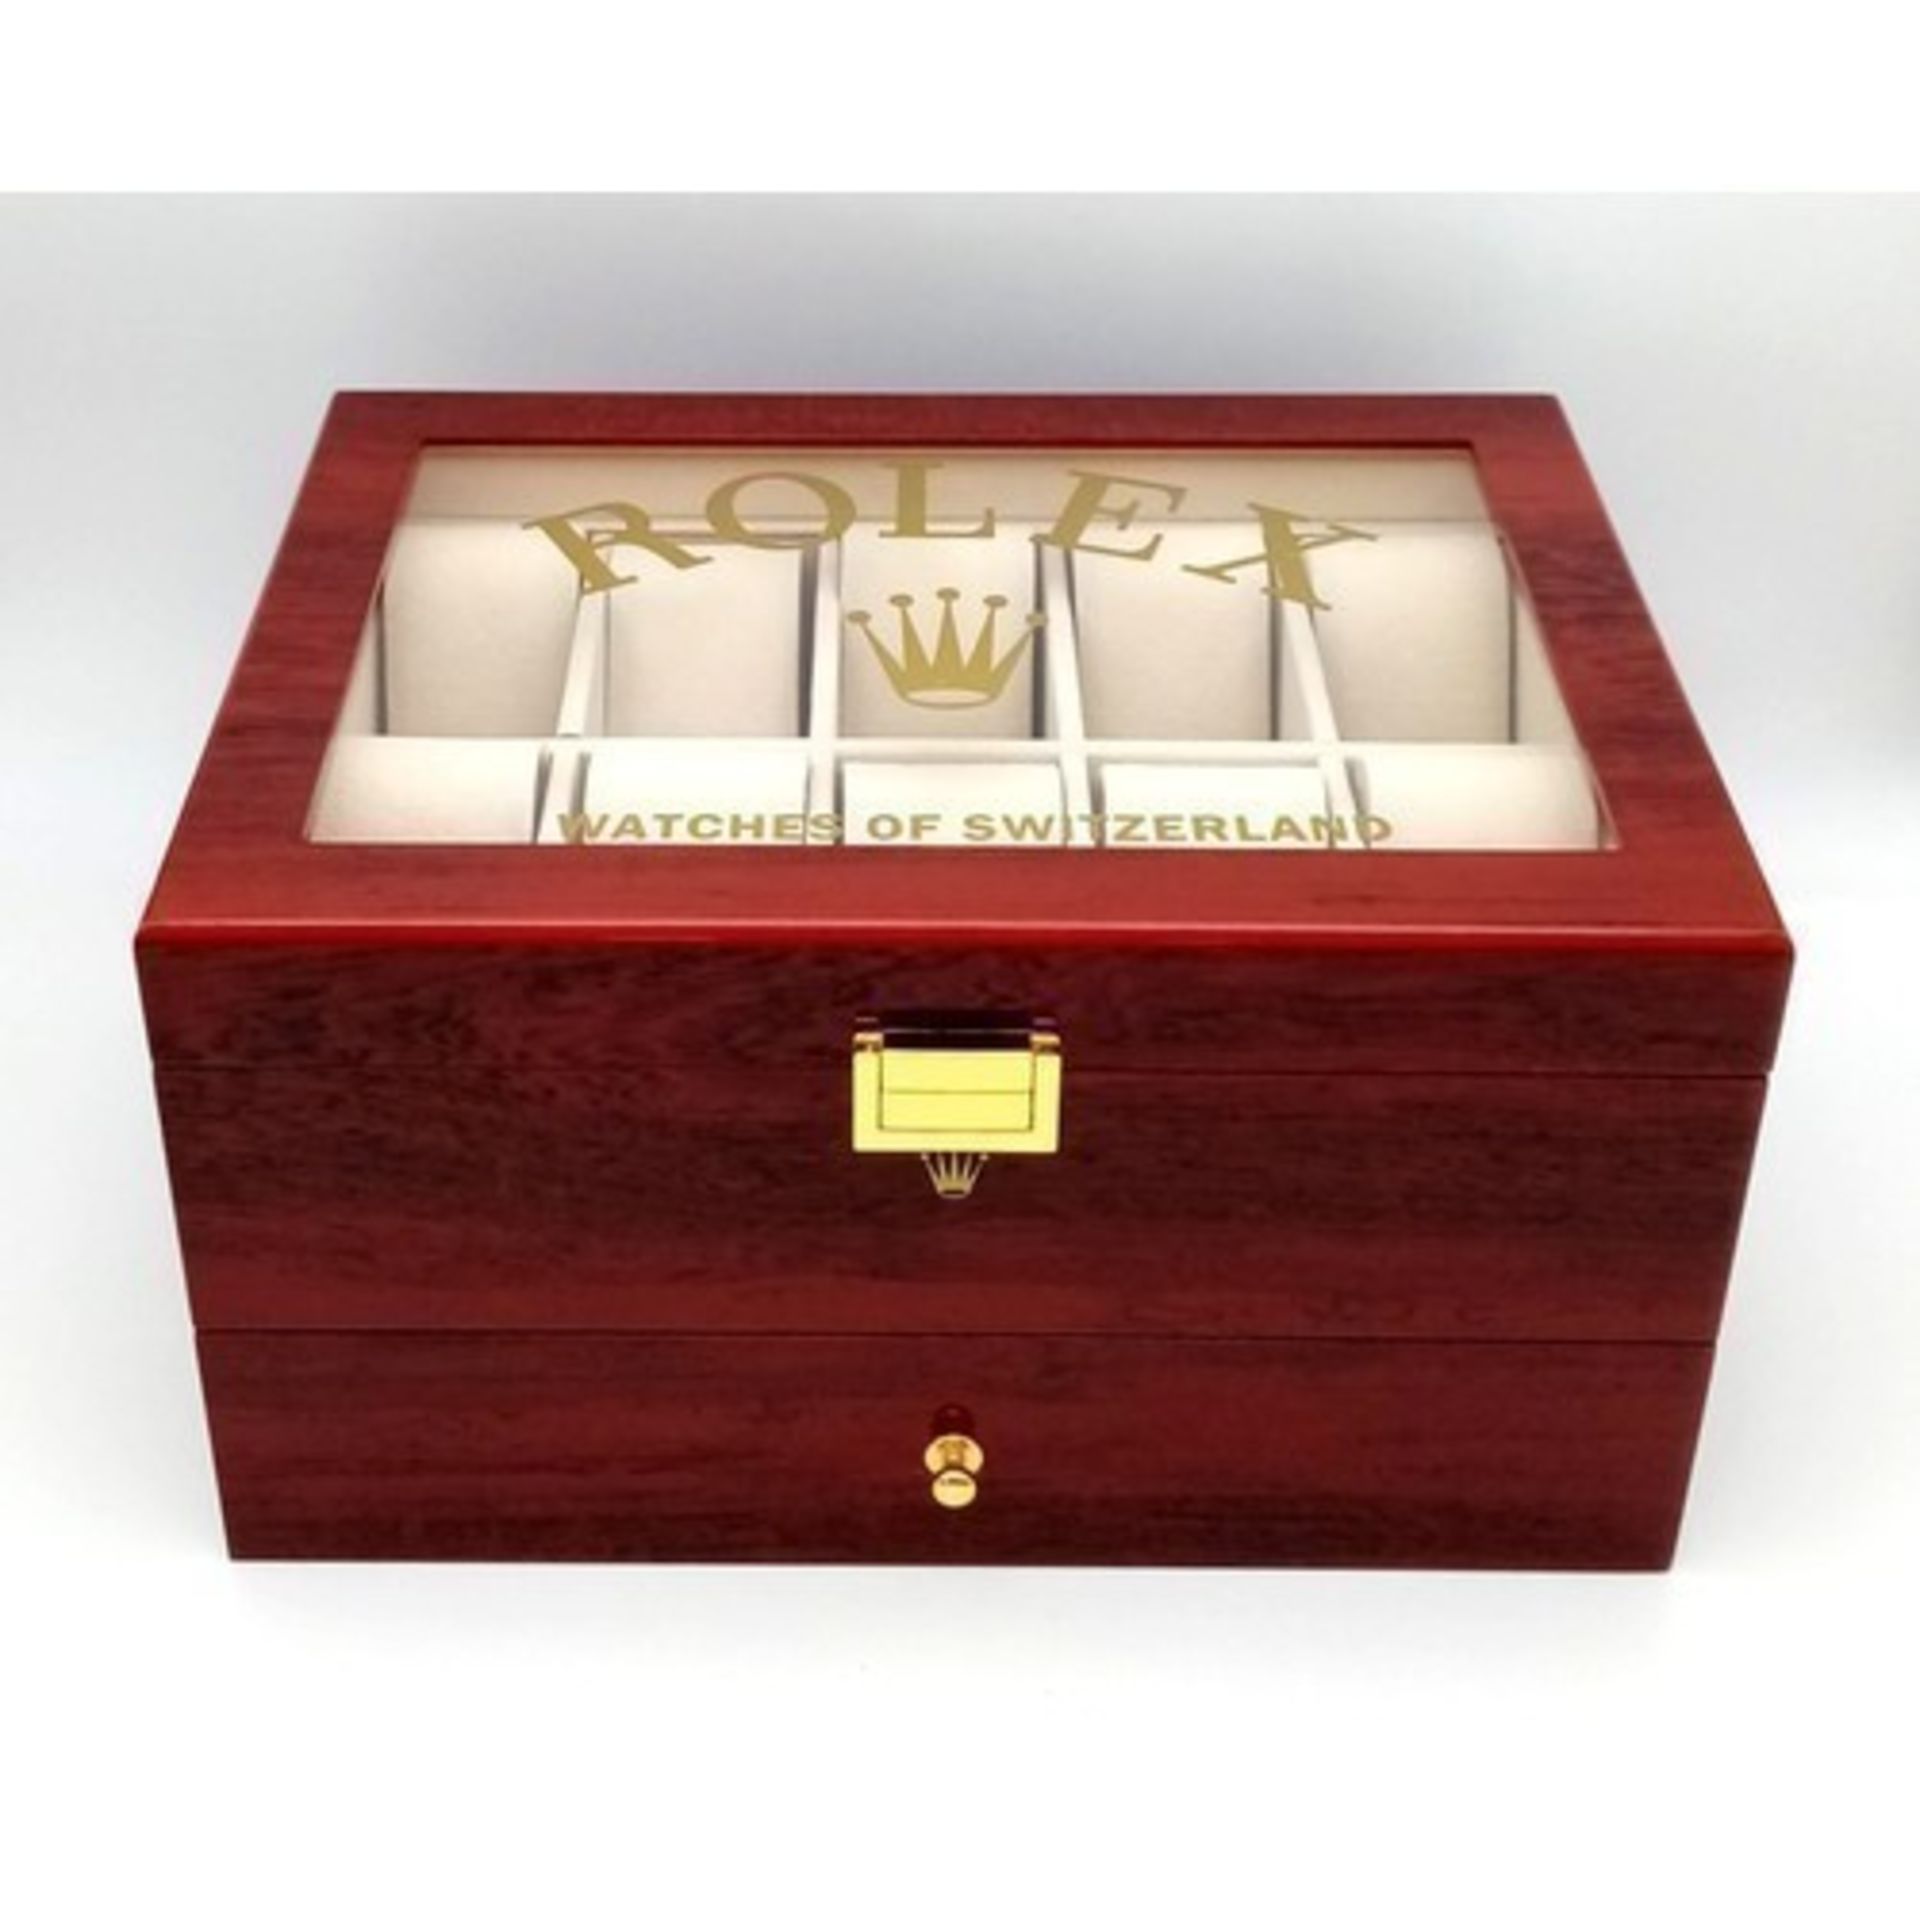 A Two-Tier Elite Watch Display Case - Perfect for Rolex Watches. 20 plush watch spaces on two